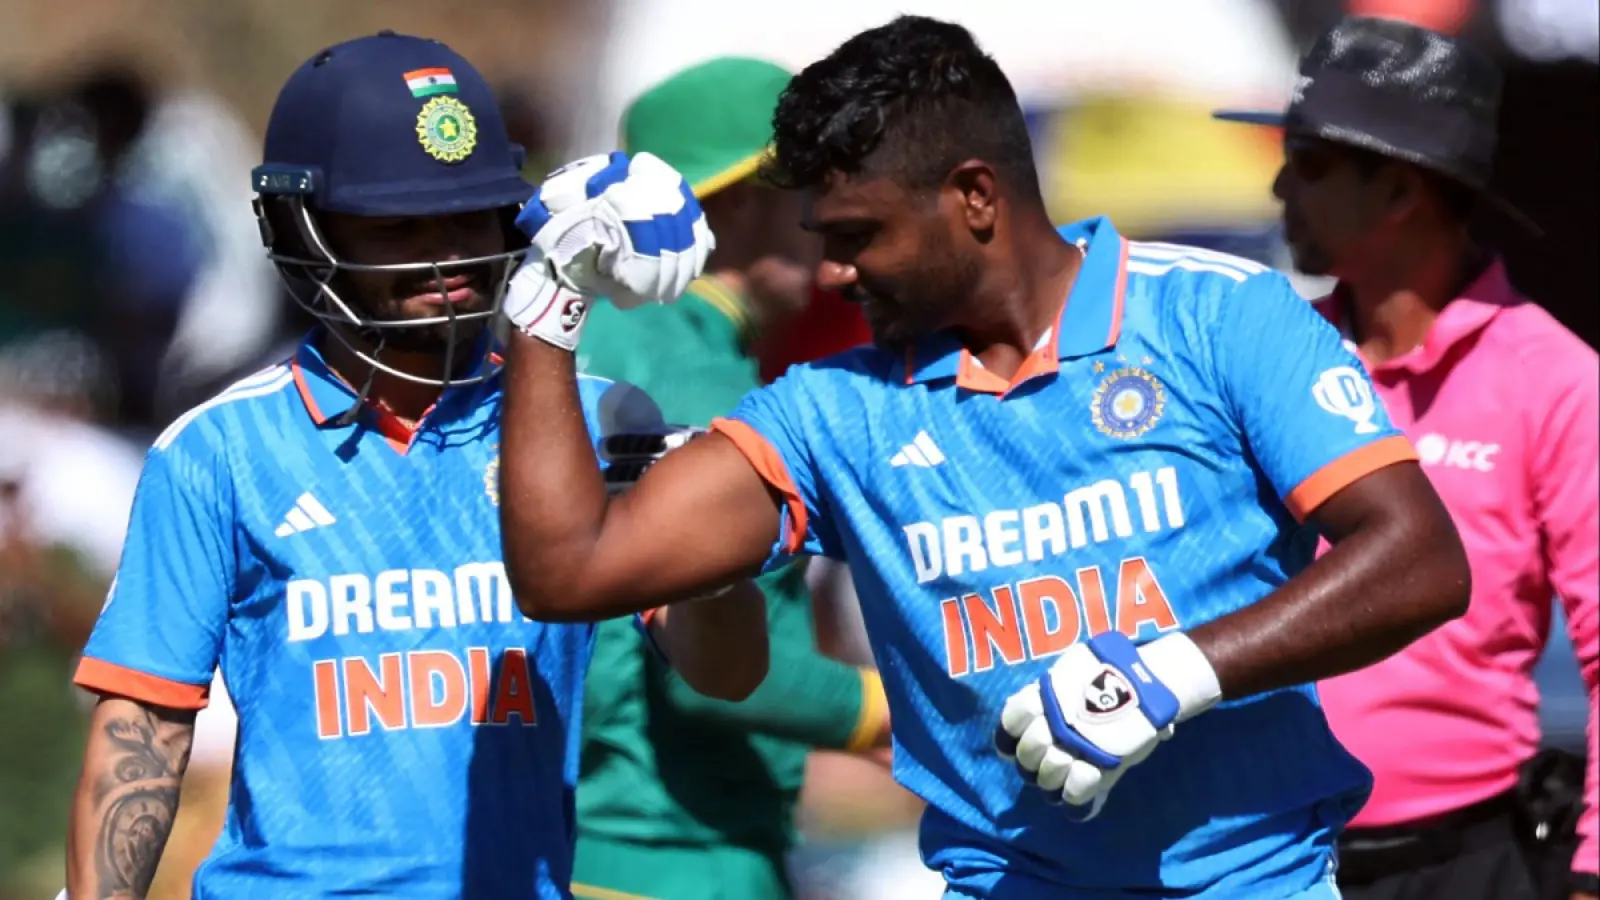 Selectors gave a big gift to Sanju Samson for scoring a century against Africa, made him captain for two matches